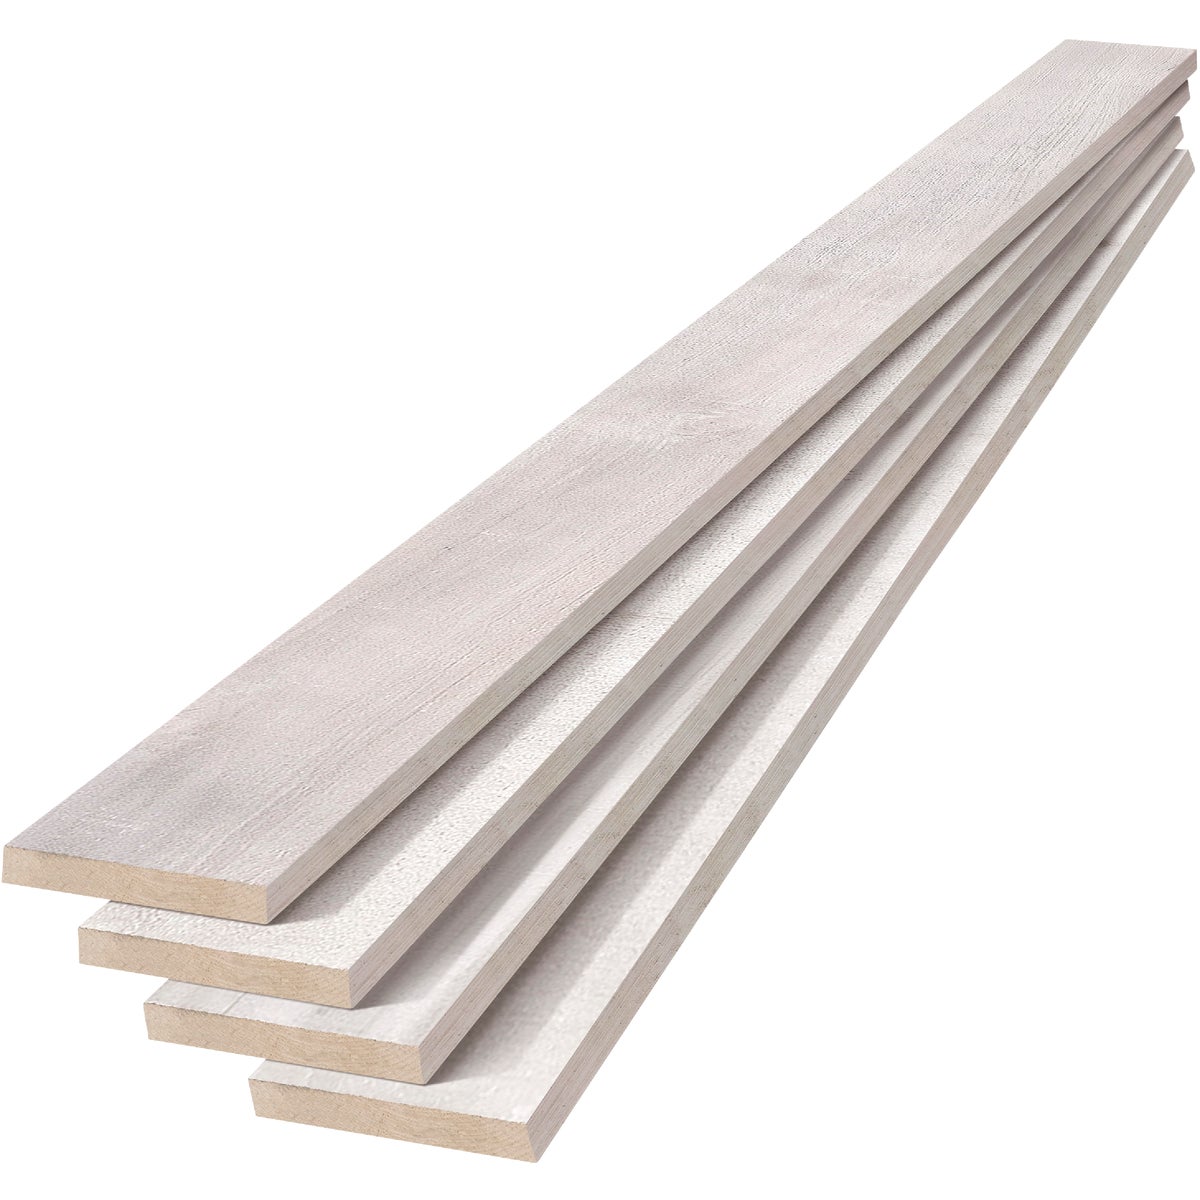 UFP-Edge 1/2 In. x 4 In. x 4 Ft. White Weathered Wood Accent Board (8-Pack)